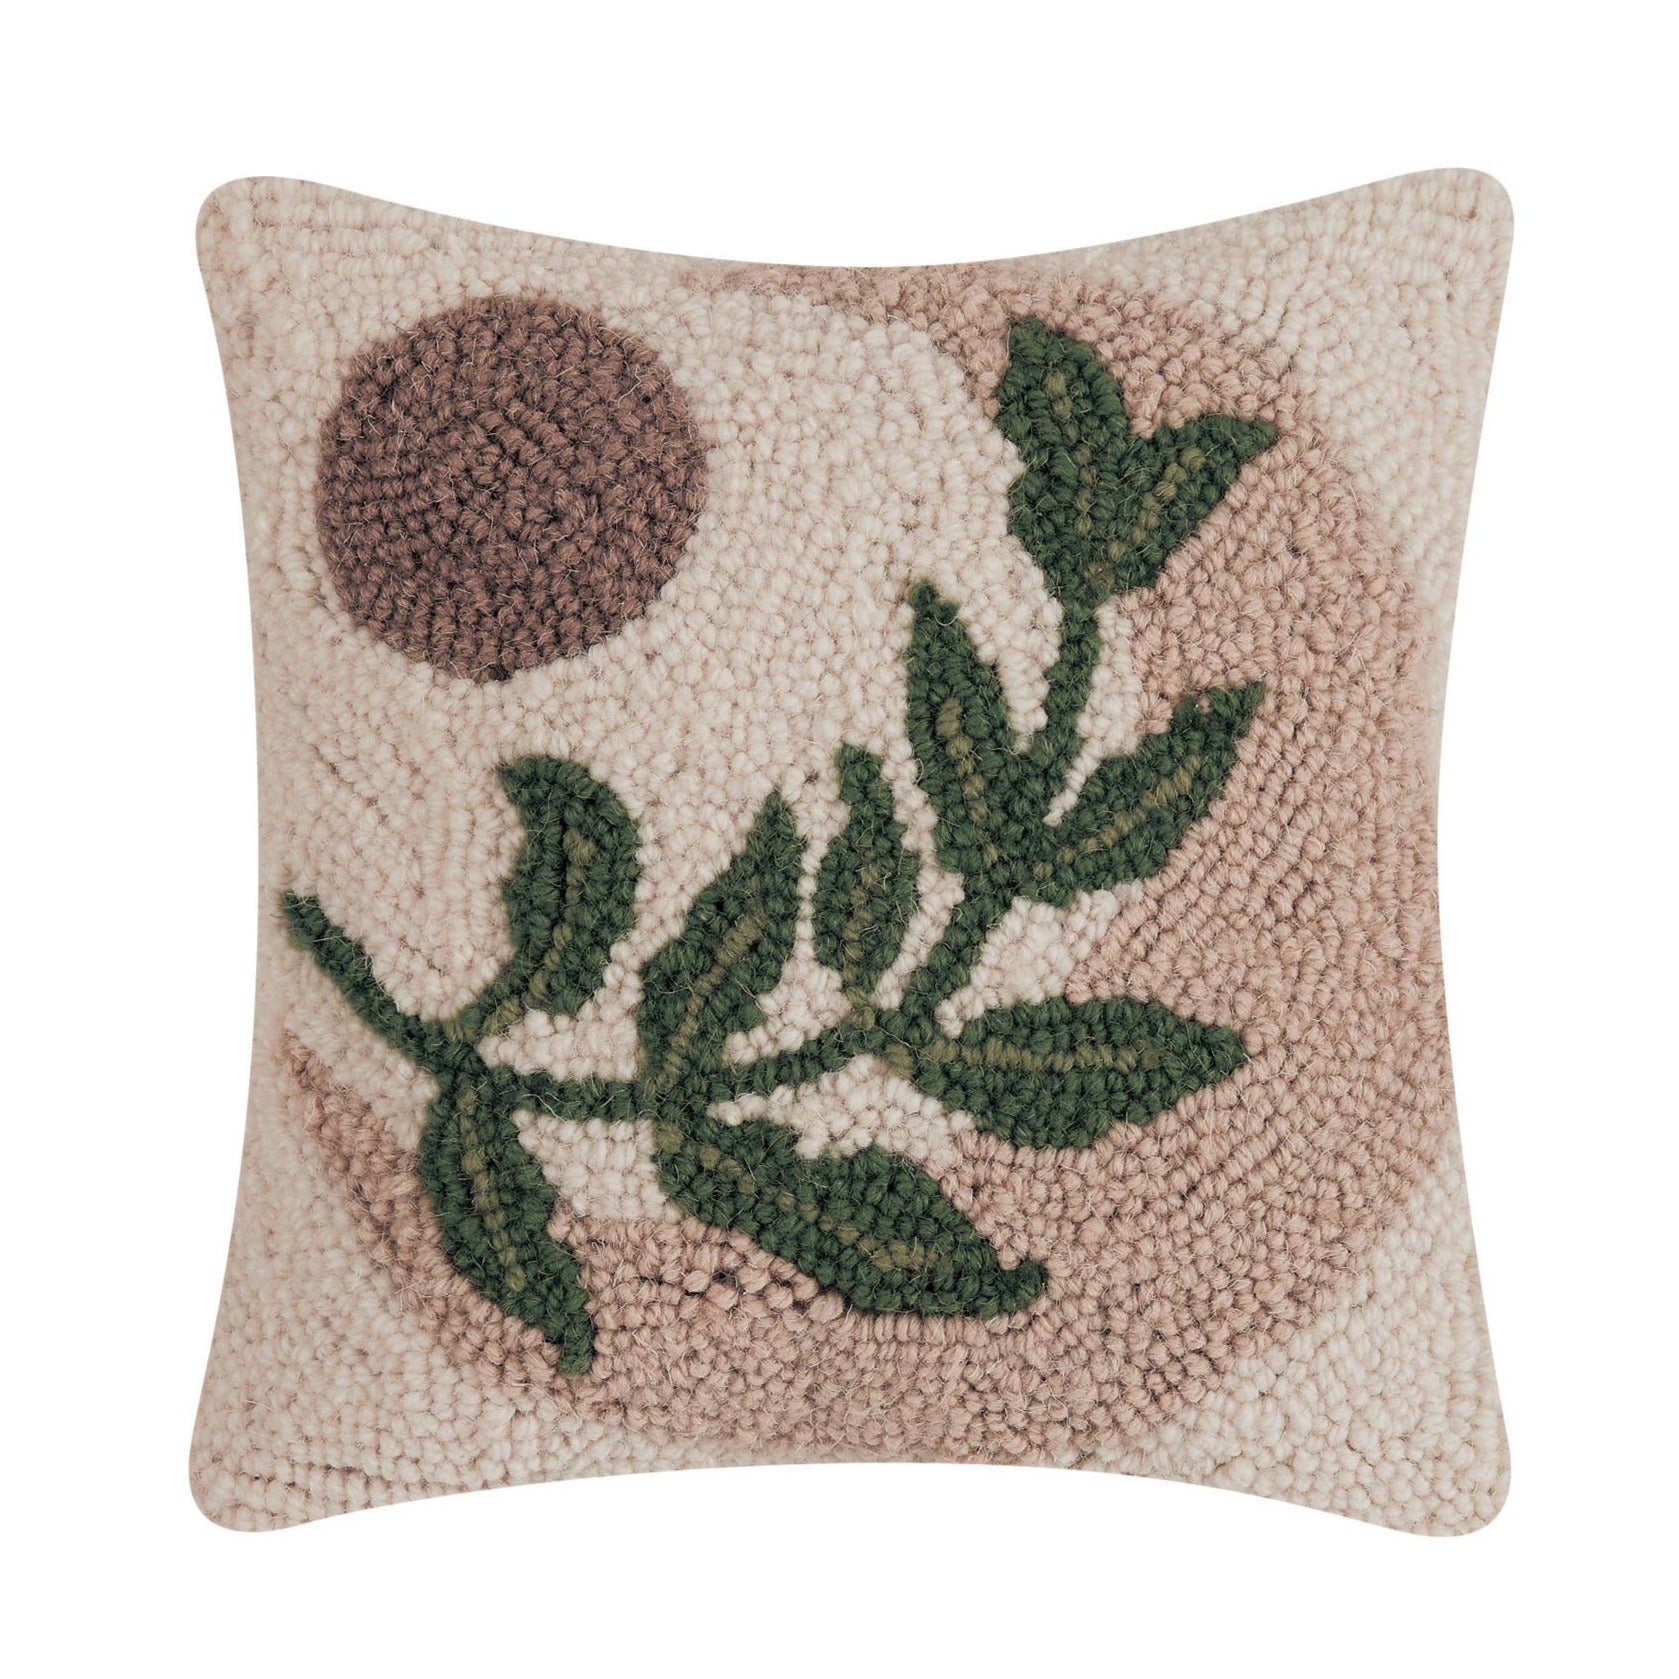 Moon And Leaves Hook Pillow